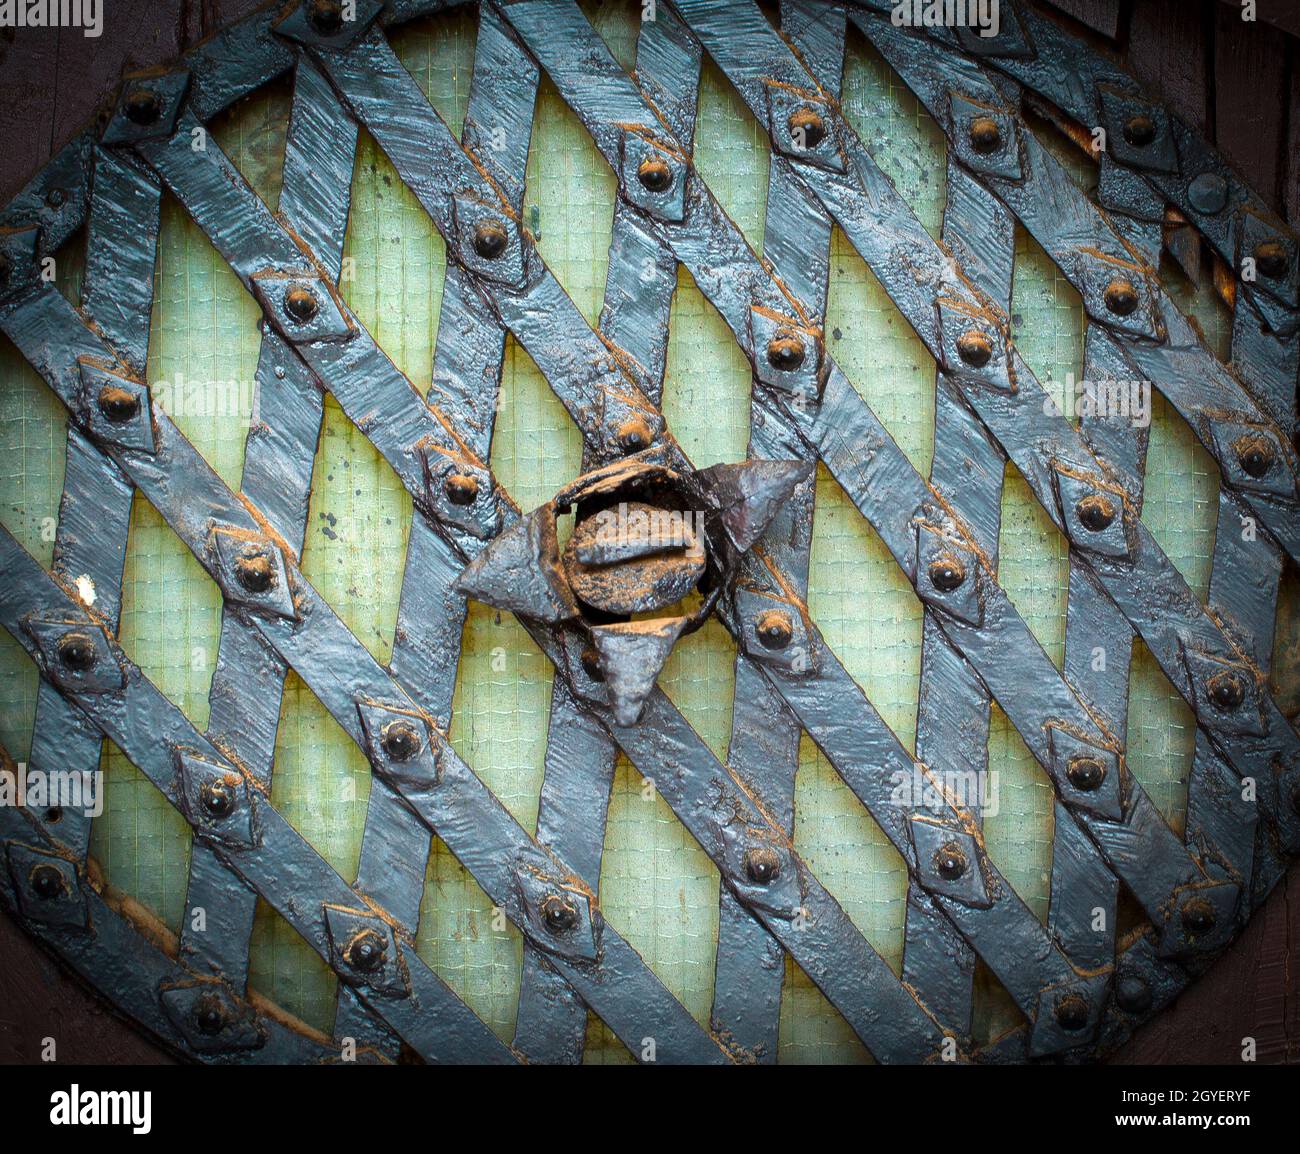 The Texture of old mesh dirty metal. Selective focus Stock Photo